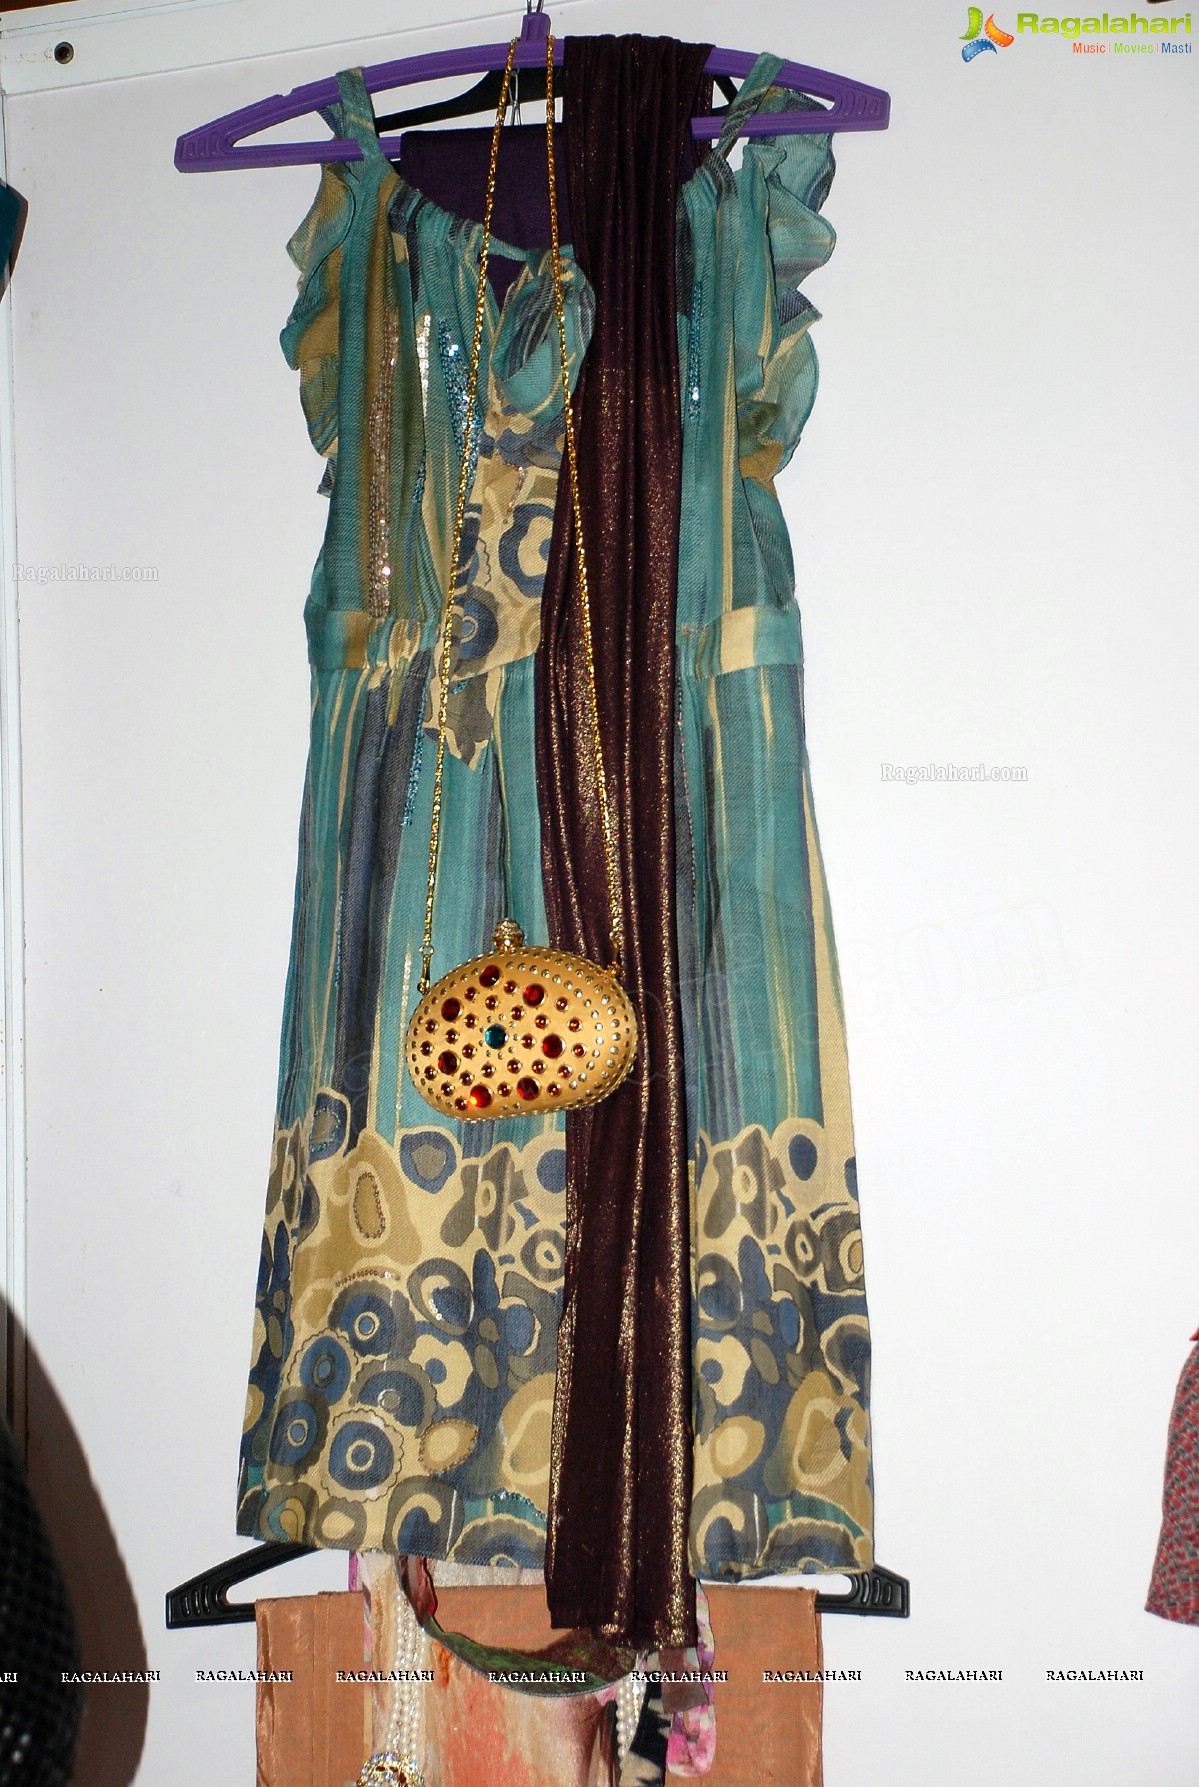 Weaves of India Exhibition